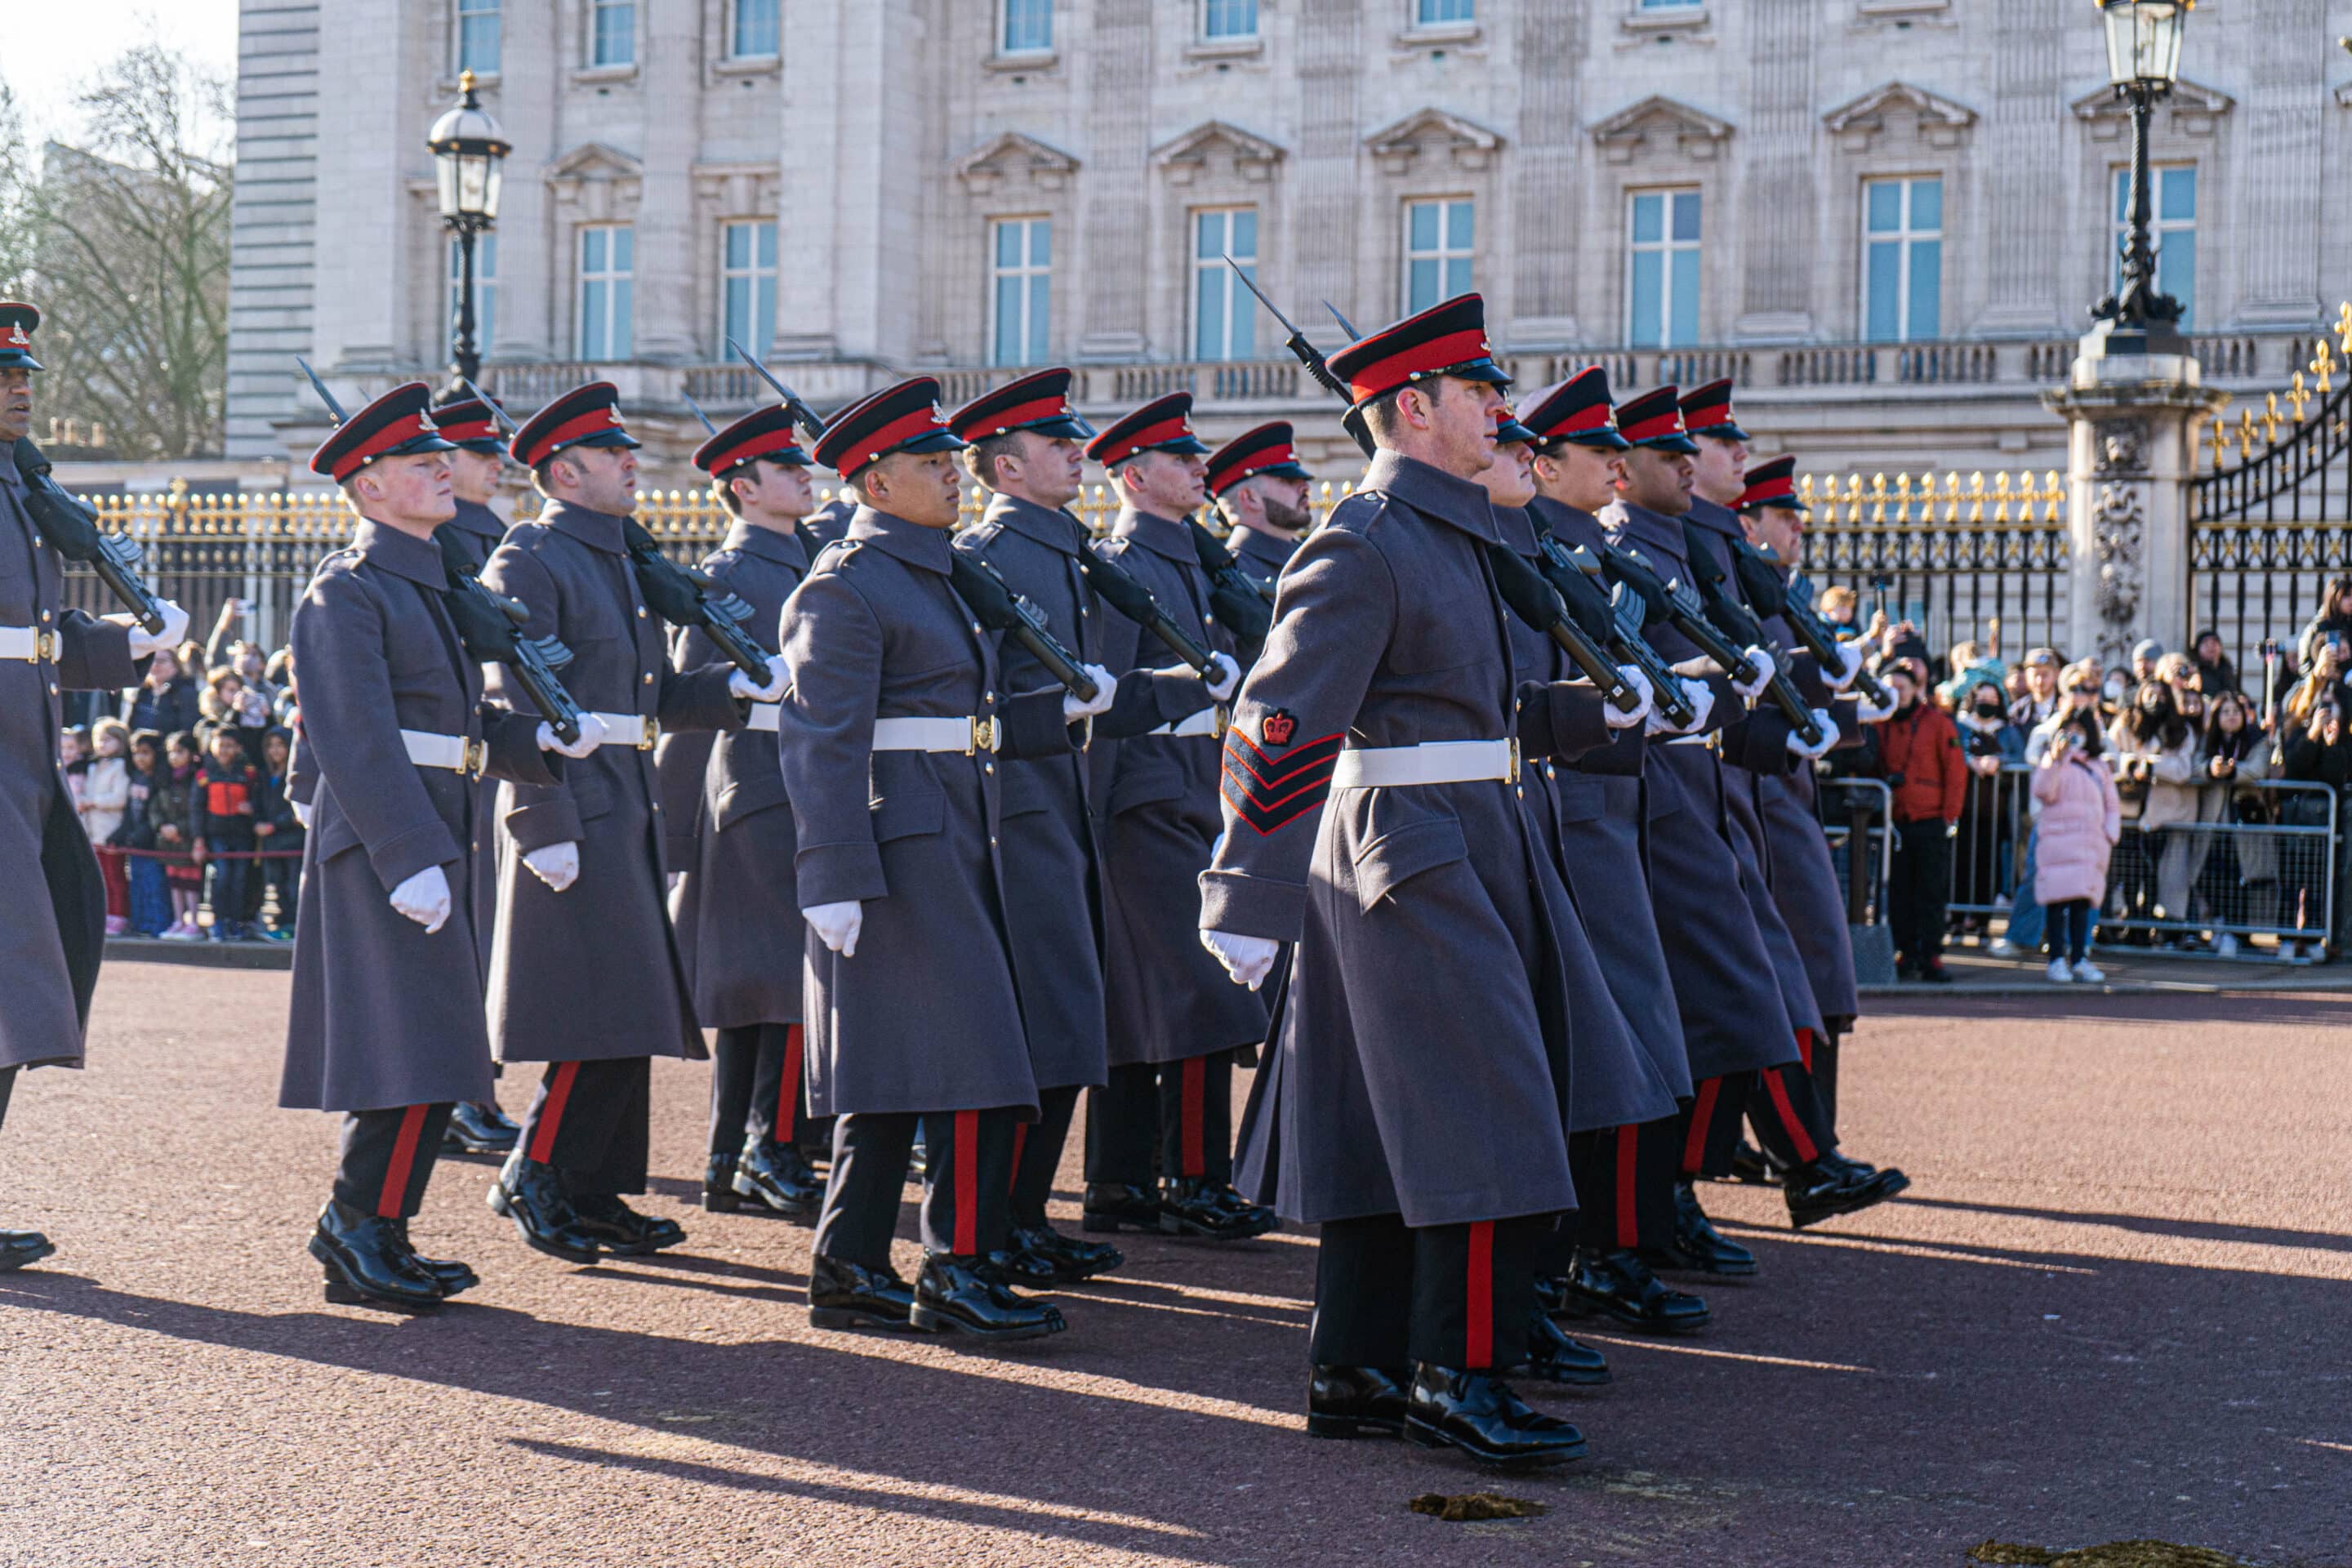 Célébrations du jubilé de platine de la reine Elizabeth II
Crédits : Amer Ghazzal/Shutterstock
RAF soldiers march during the changing of the guard at Buckingham Palace  as part of the  70th anniversary commemorations of Queen Elizabeth II assuming the throne, the longest reign of a British or English monarch
Queen Elizabeth II platinum jubilee celebrations, Buckingham Palace, London, UK - 07 Feb 2022/shutterstock_editorial_Queen_Elizabeth_II_platinum_ju_12793483h//2202071610